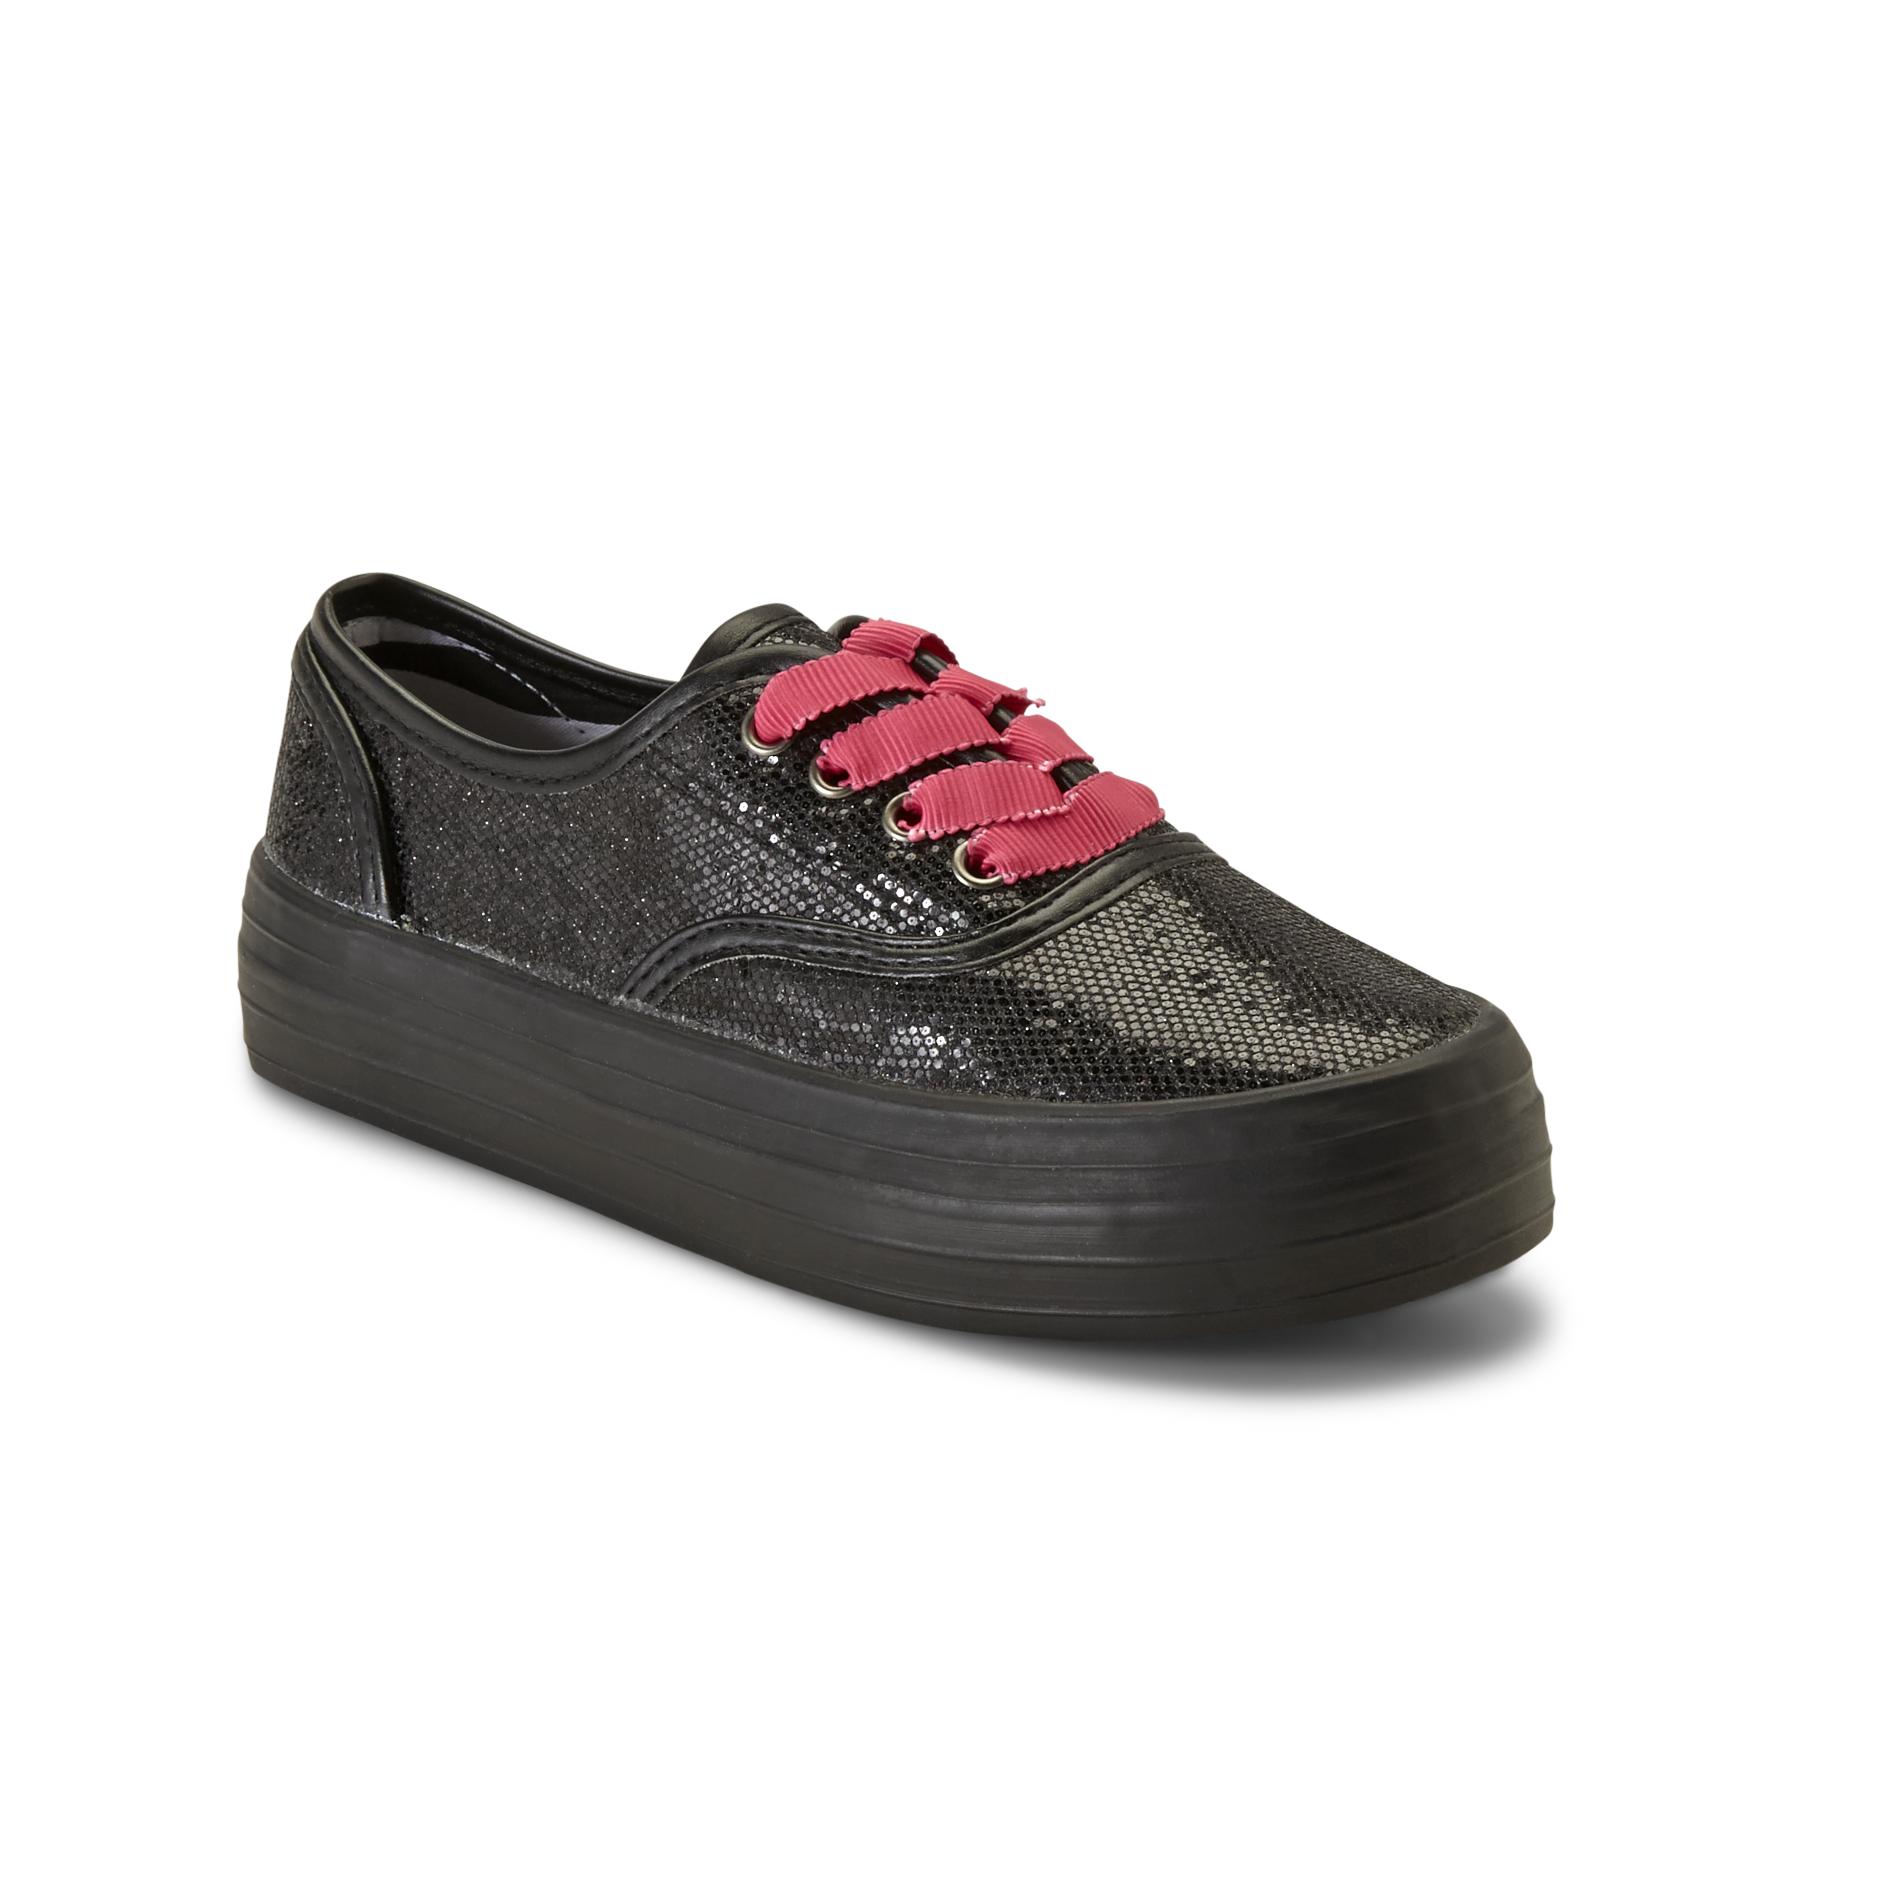 Bongo Girl's Cameo Black/Red Canvas Sneakers - Glitter